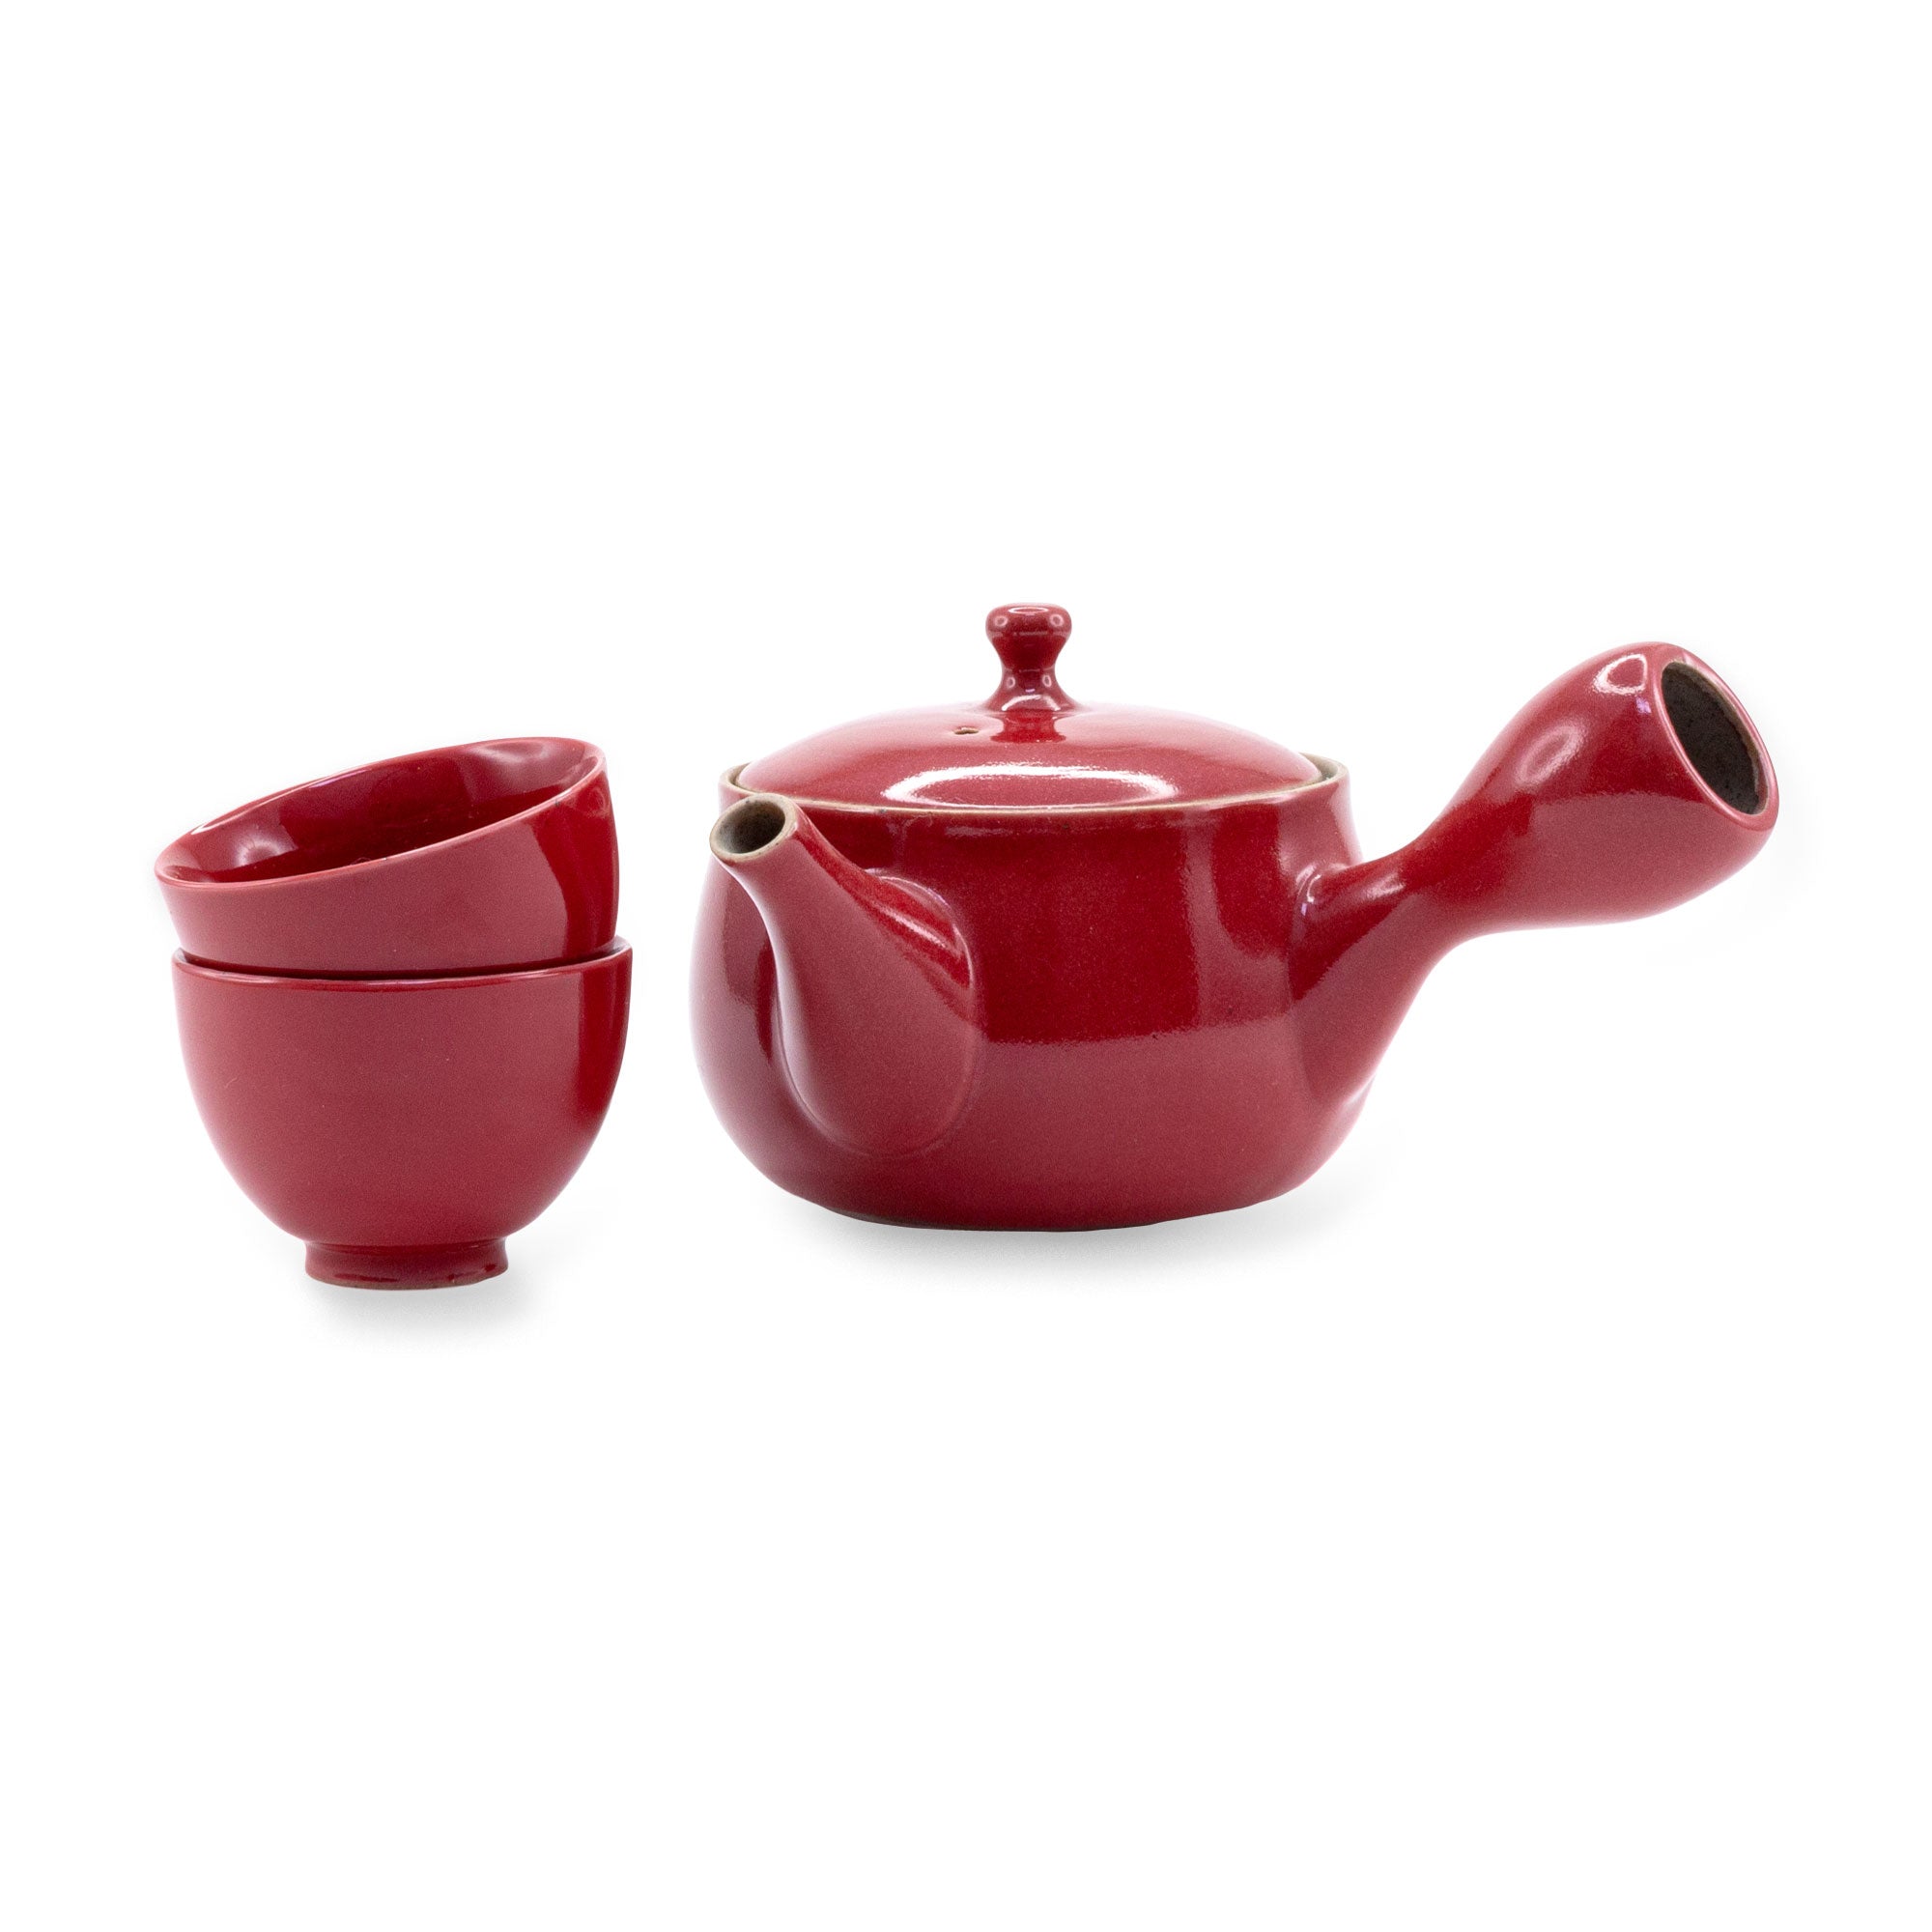 Asiatica - Red Kyusu Teapot with 2 Cups